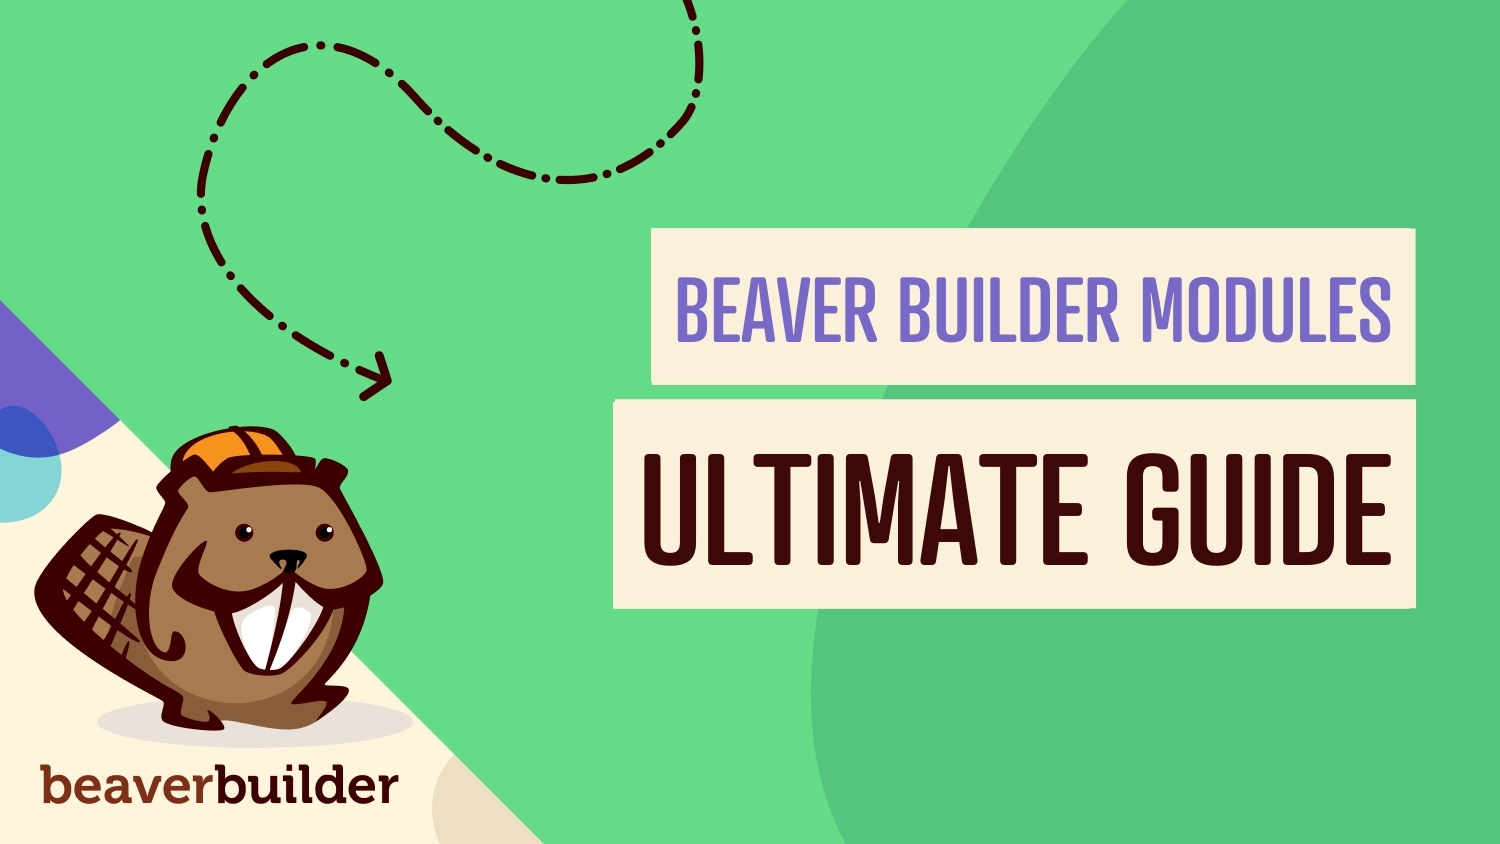 The Ultimate Guide to Beaver Builder Modules